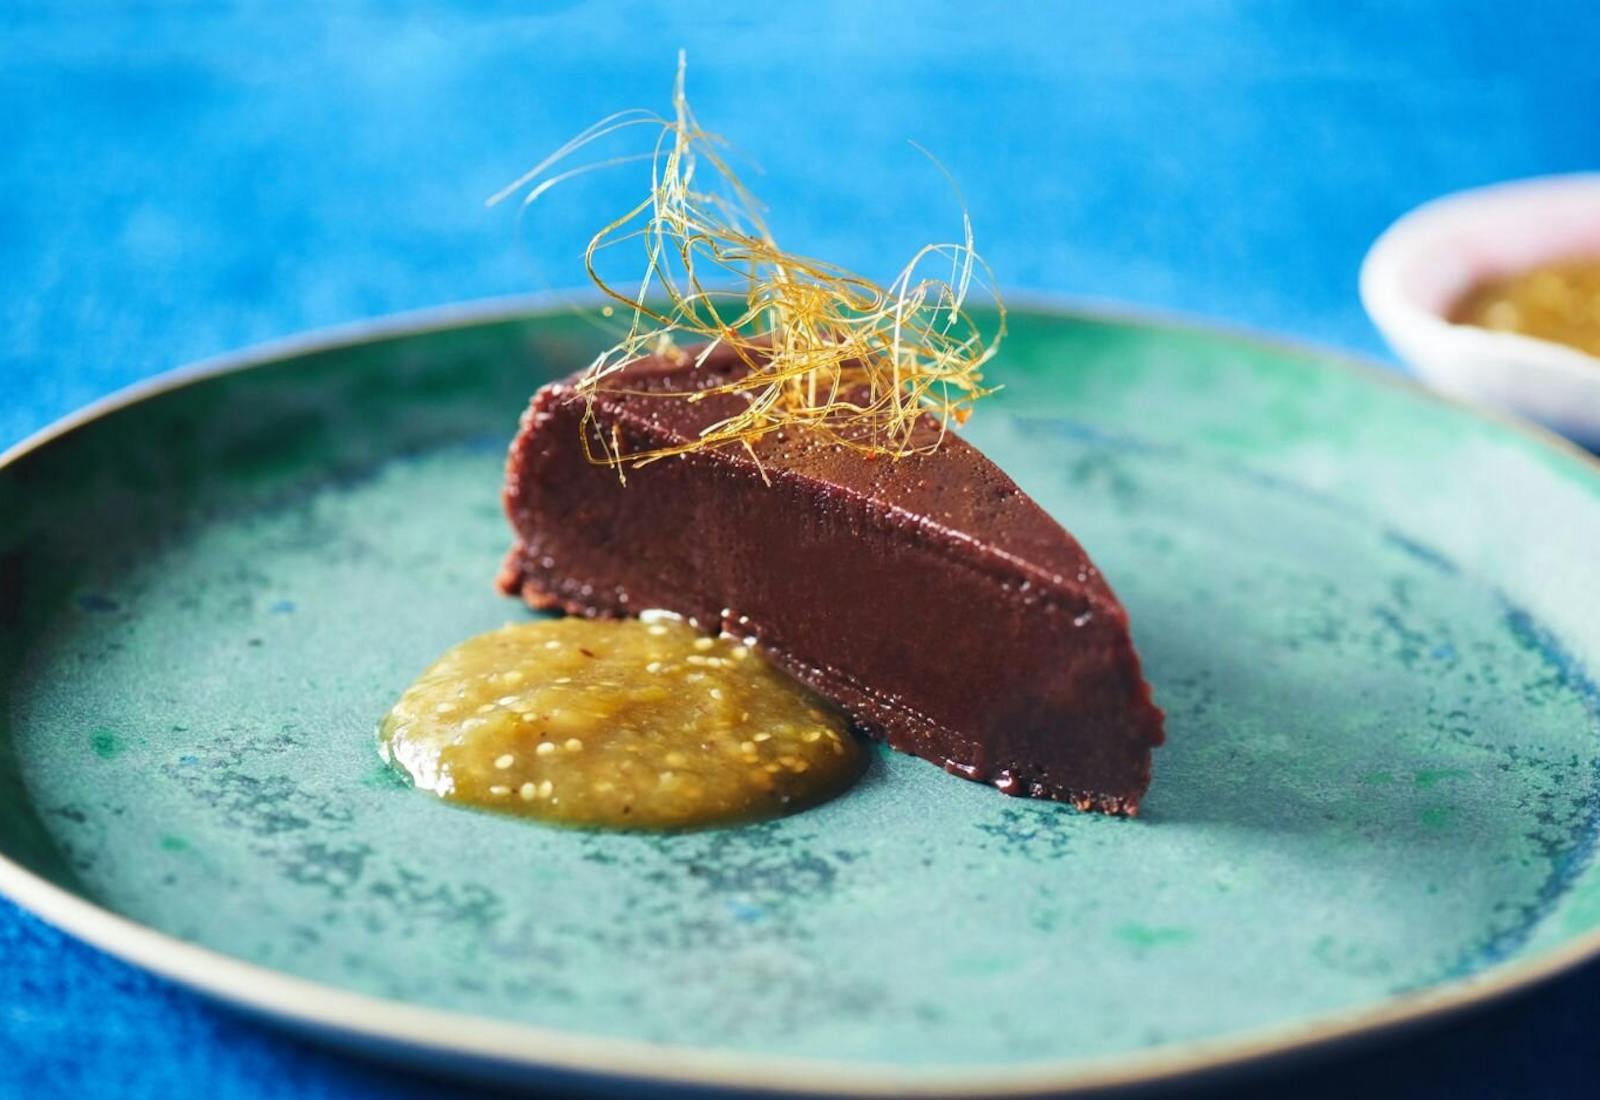 Slice of boca negra with dollop of tomatillo sauce on blue plate atop blue tablecloth.